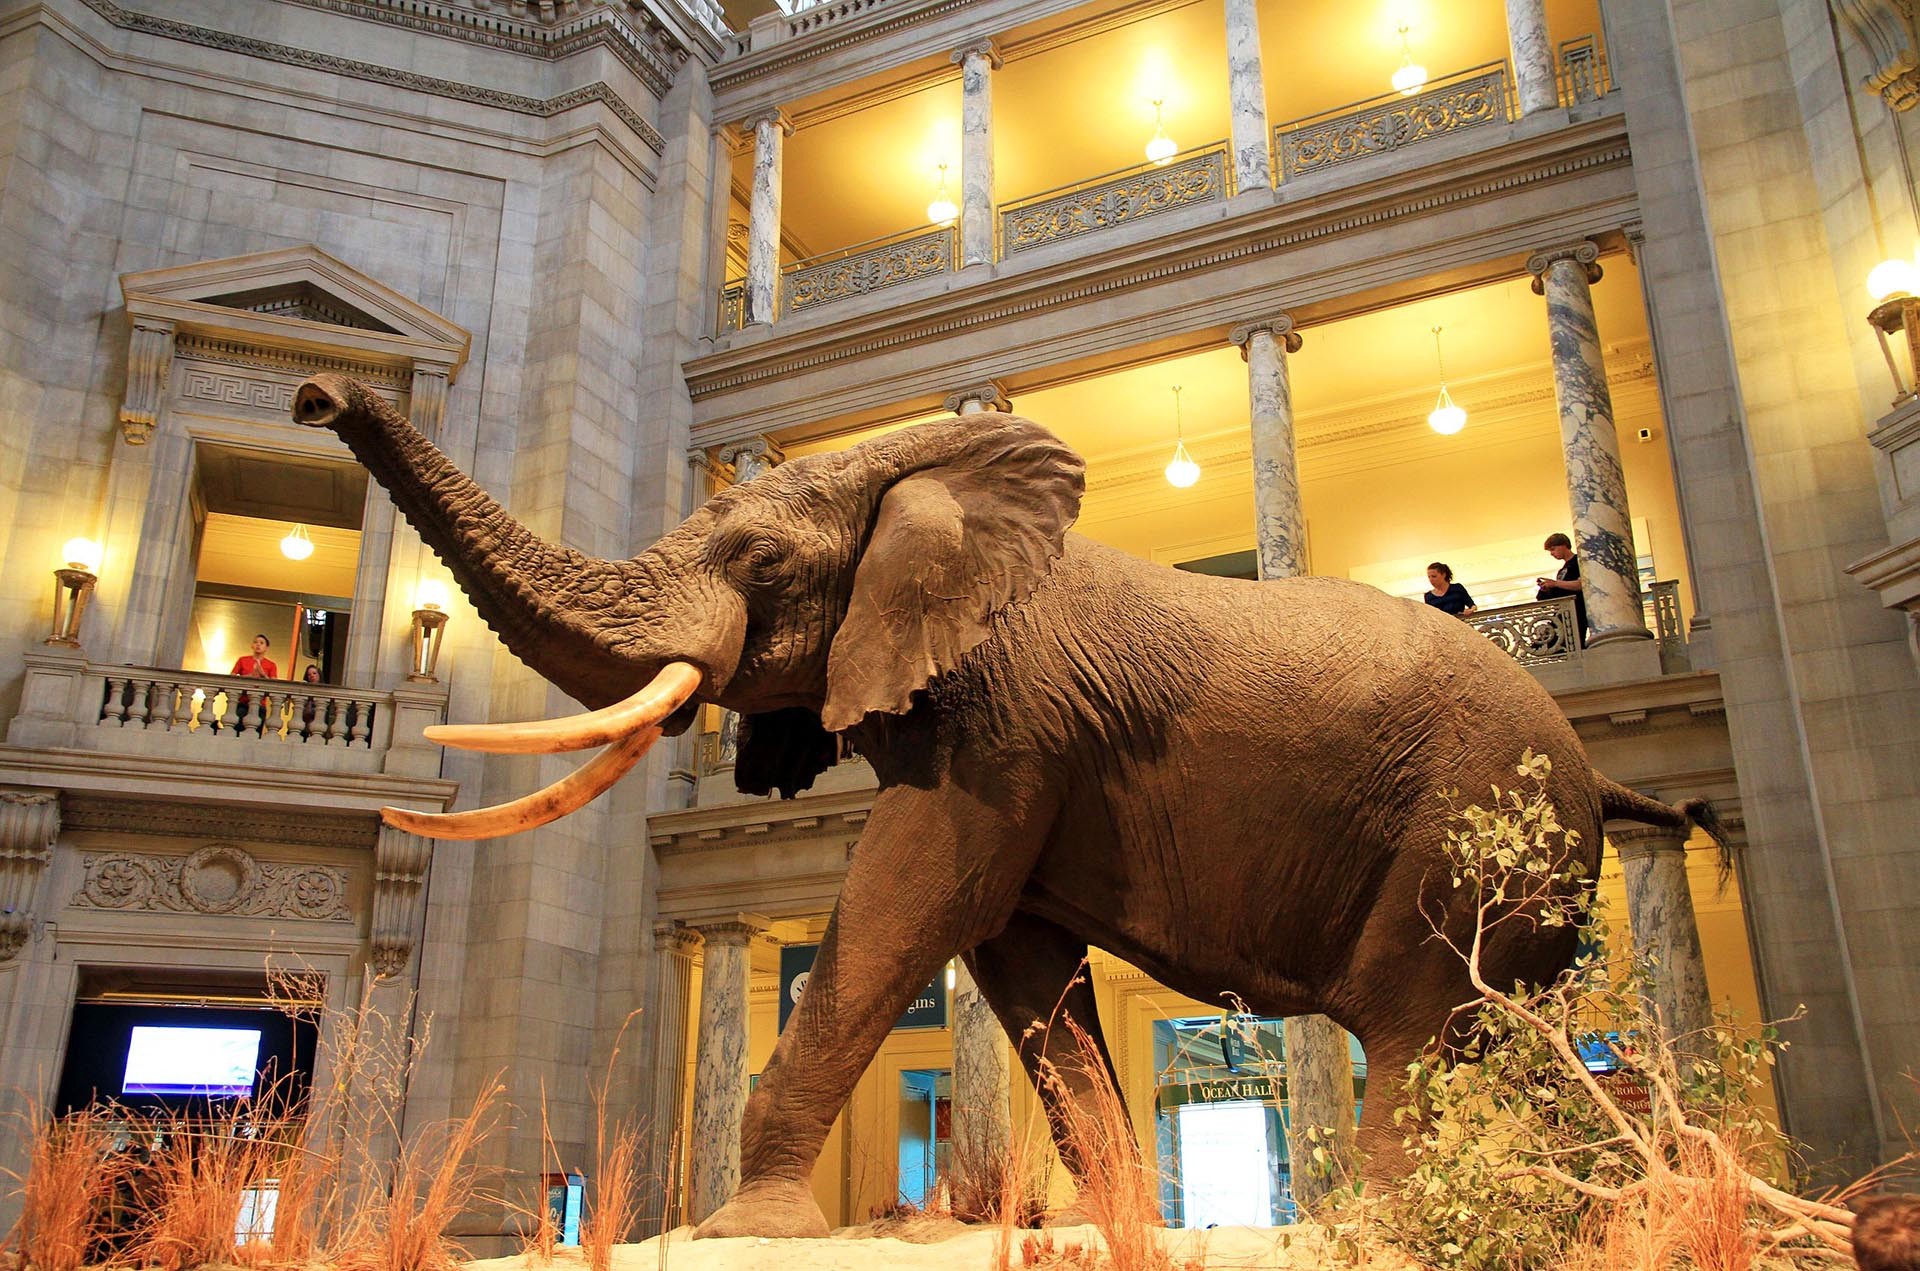 A to-scale mummified or sculpted brown elephant stands on display in a large domed room several floors high. Each floor has railings where people can stand to view the display. What appear to be marble Doric columns run the length of each floor.